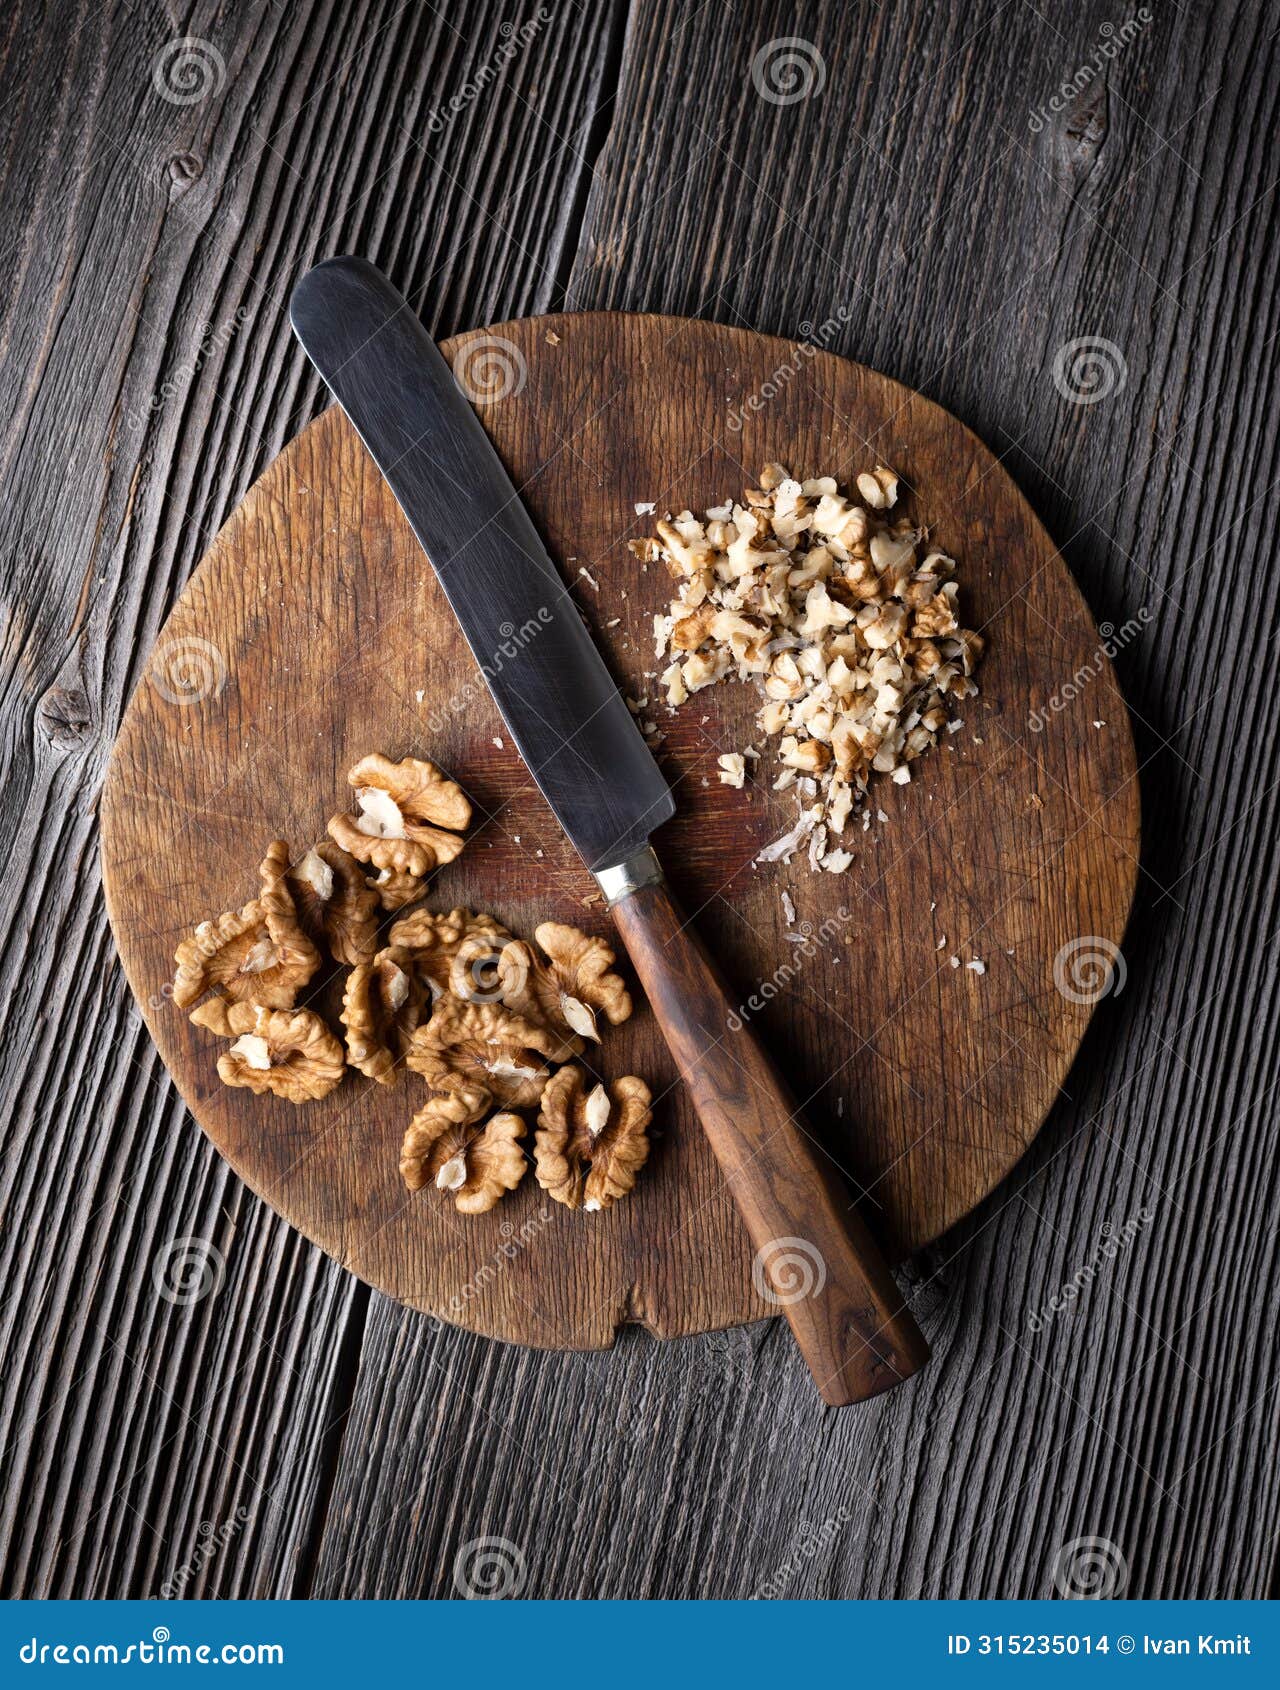 chopped walnuts and knife on wooden plate